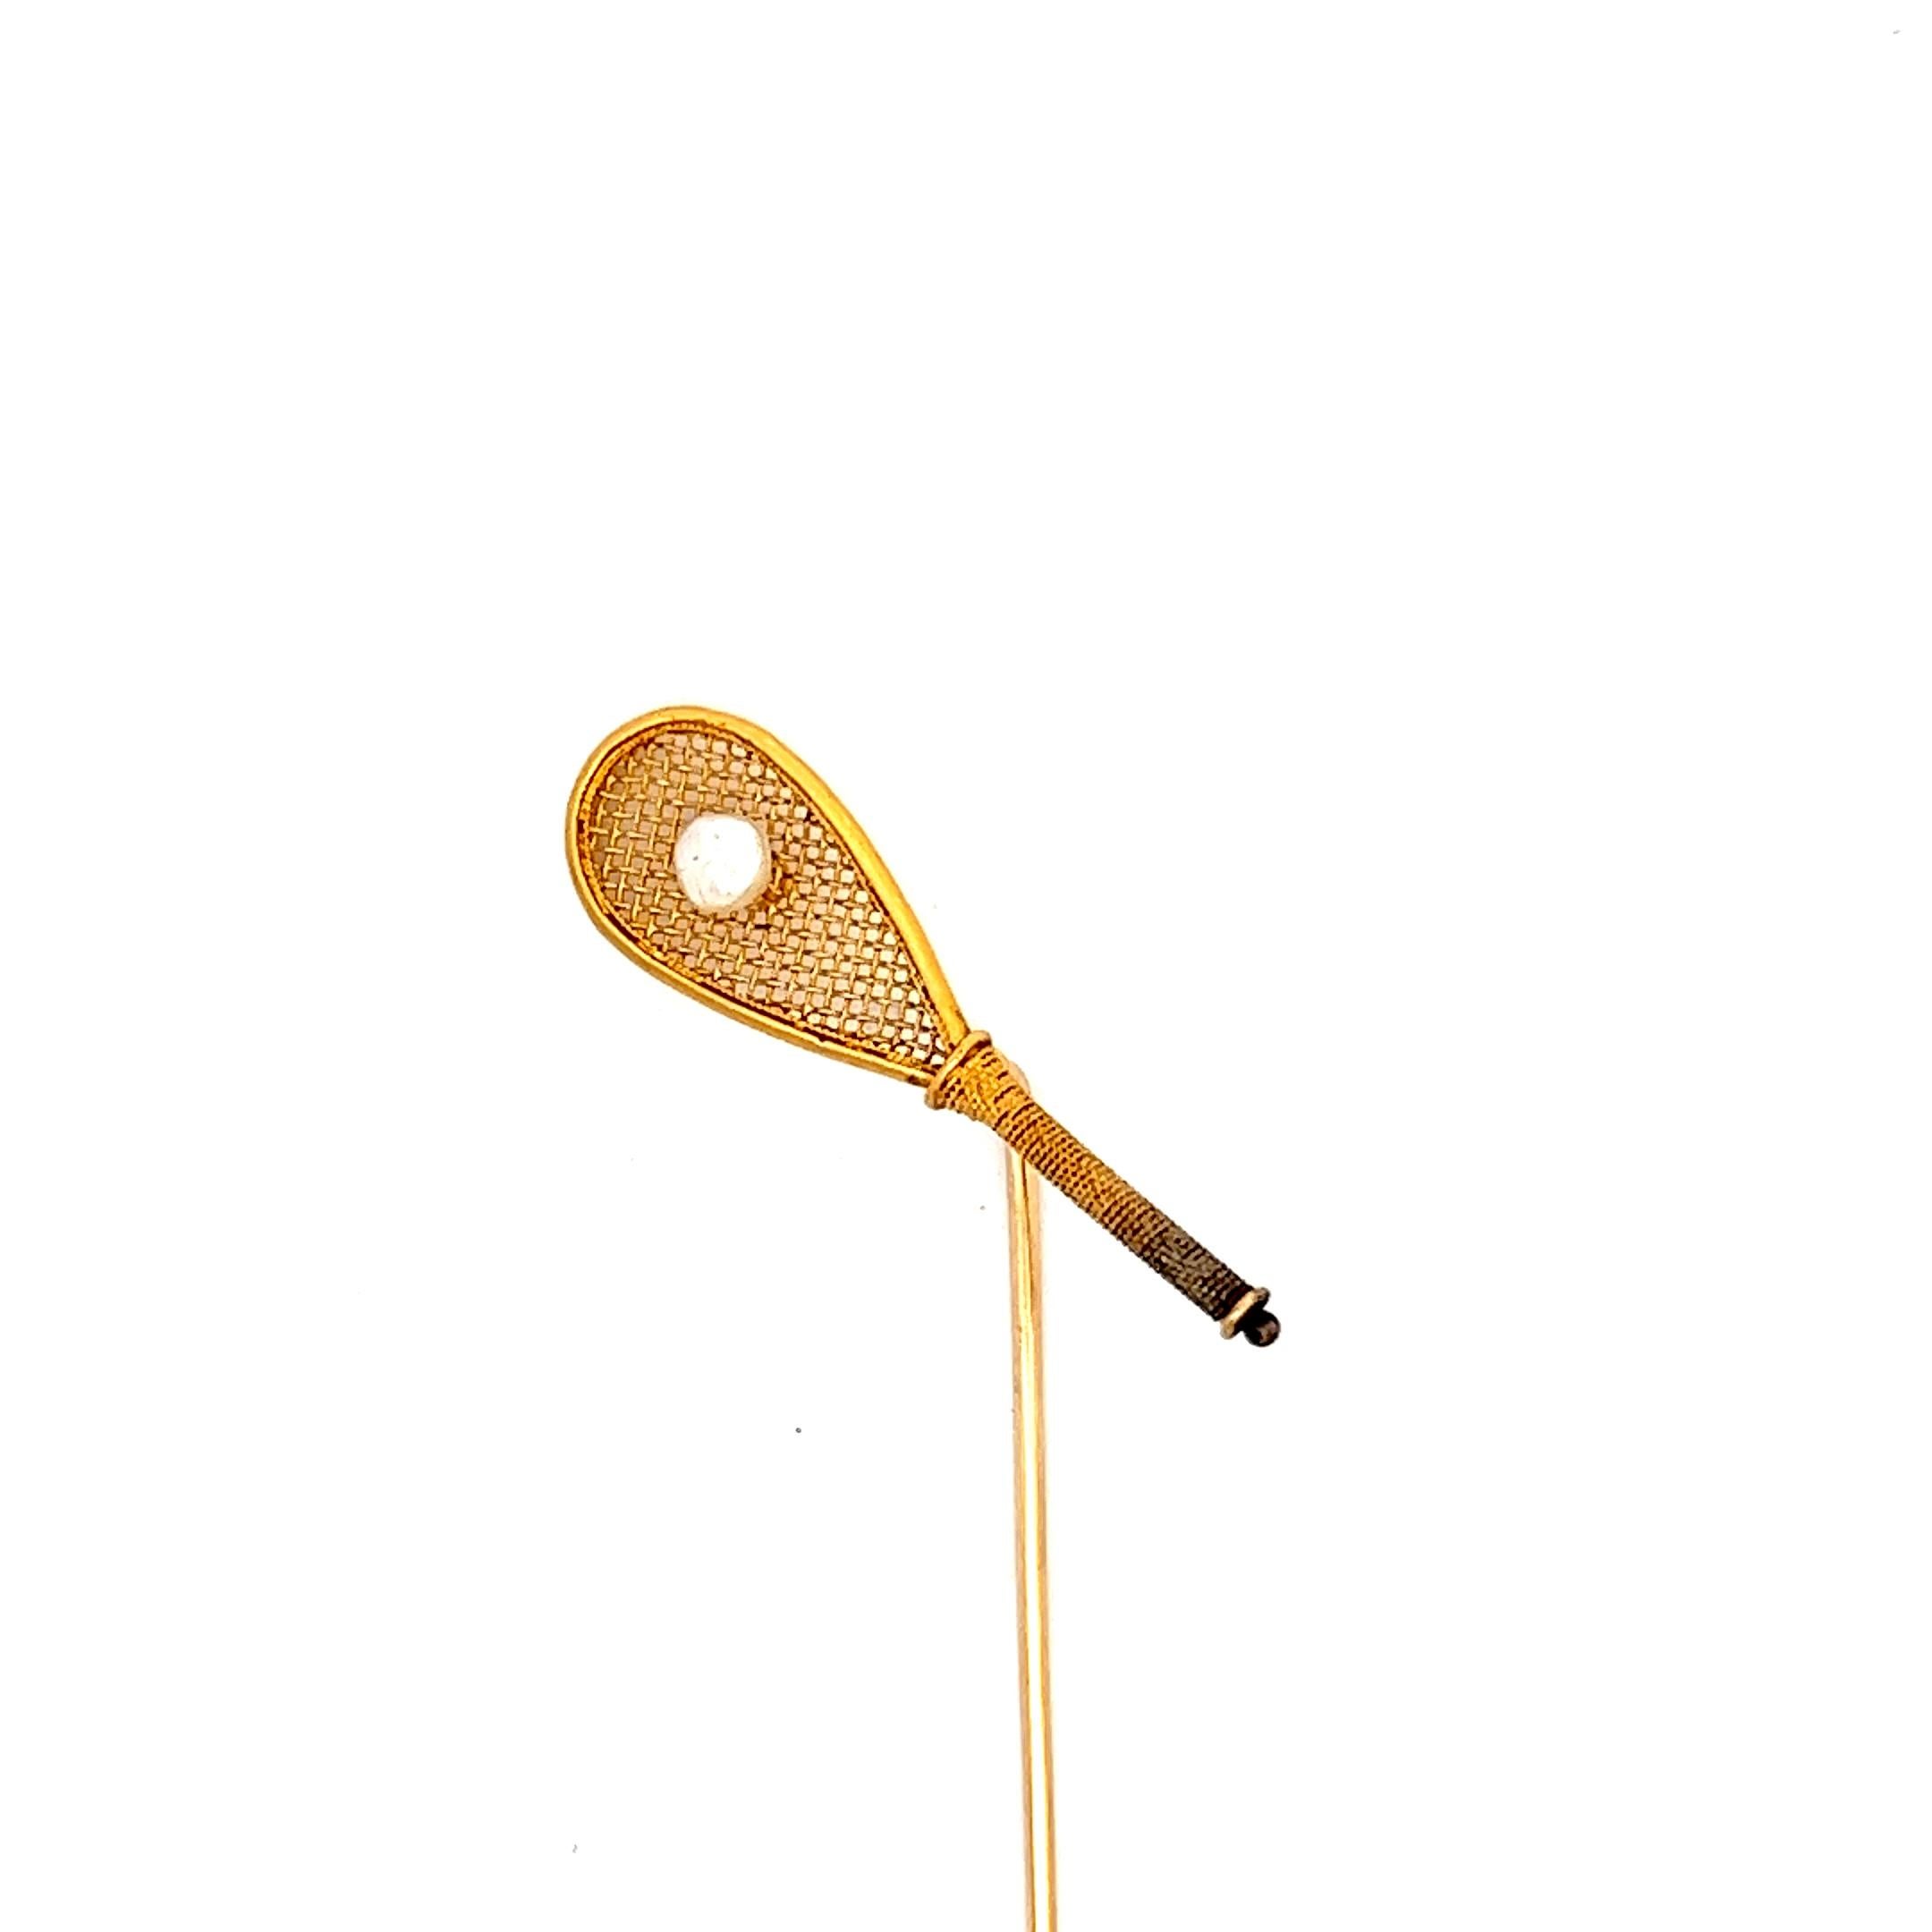 

This lovely little stick pin from the early Victorian Era features a real tennis racket in 18K yellow gold with a pearl as the cork ball in the center. The detail in this pin is incredible, from the woven mesh to the wrapped grip tape on the